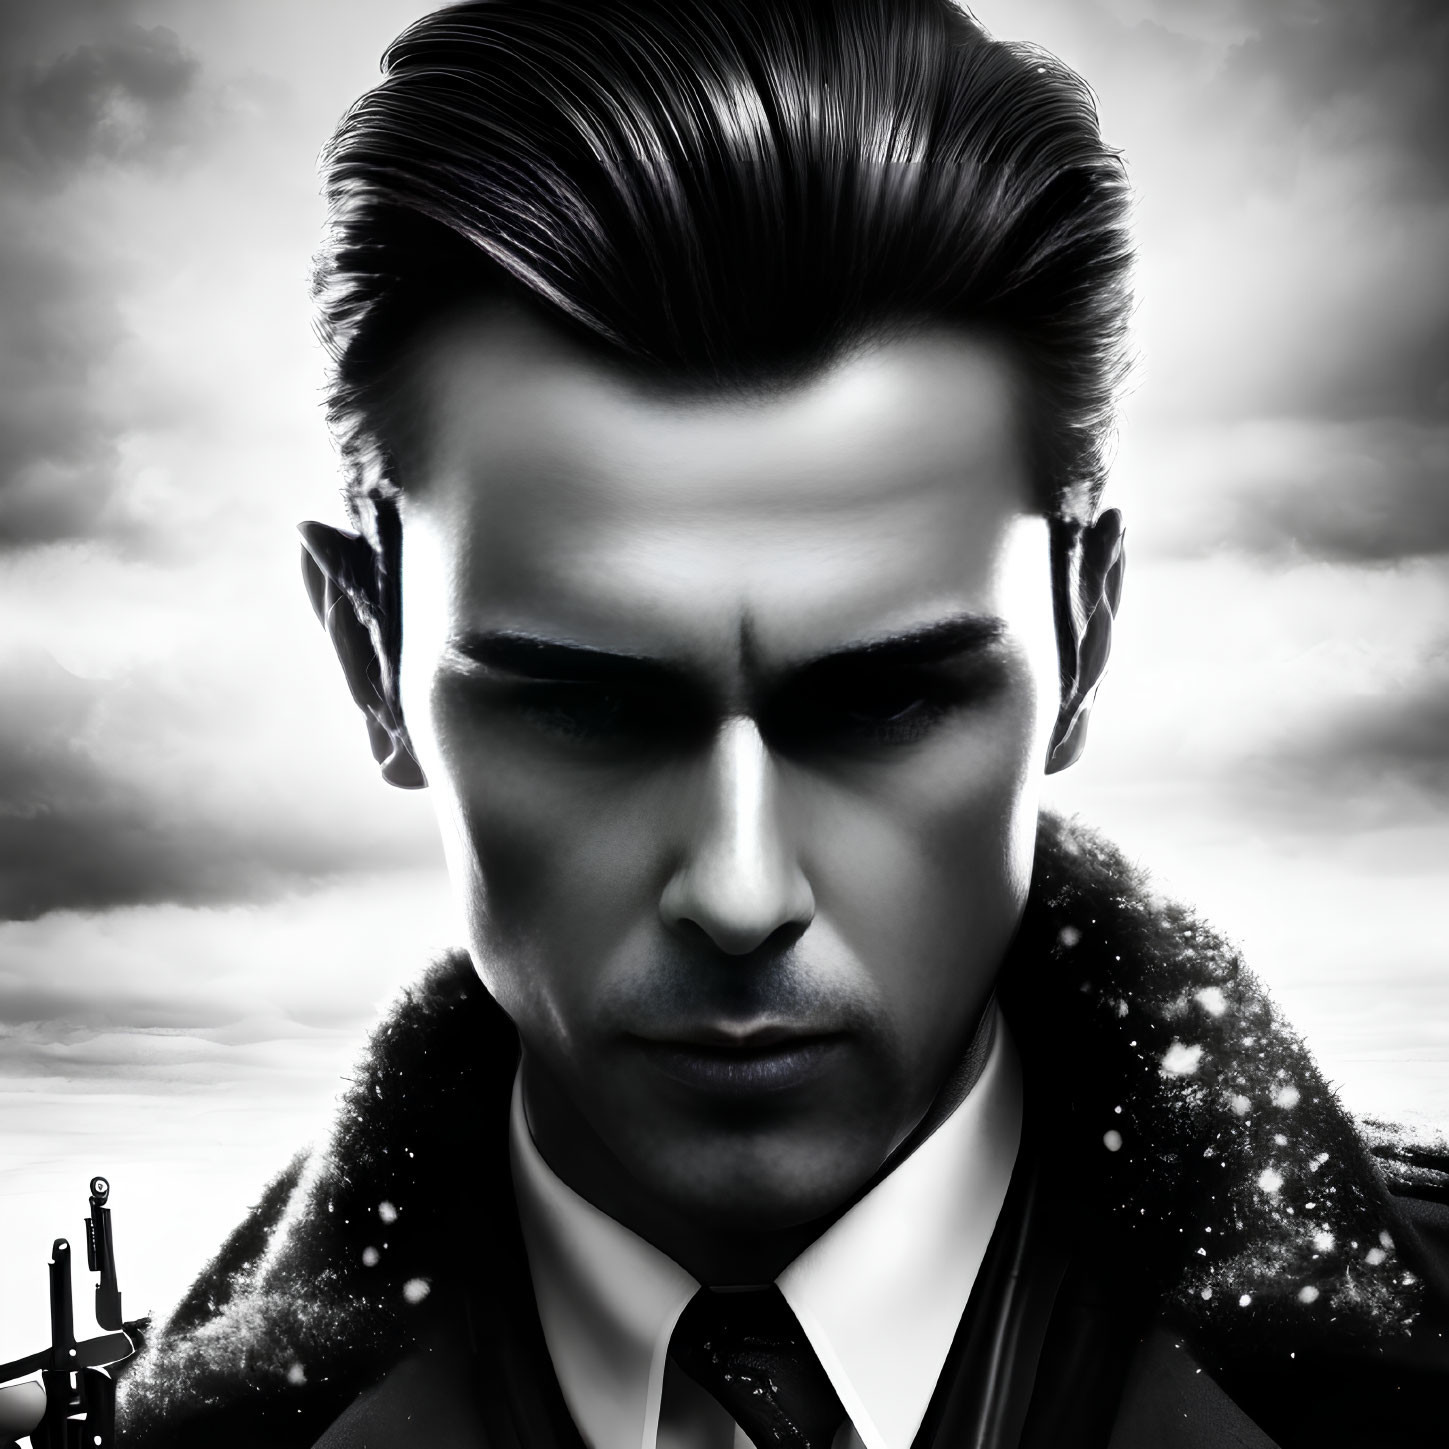 Monochrome portrait of serious man in suit with slicked-back hair against cloudy sky.